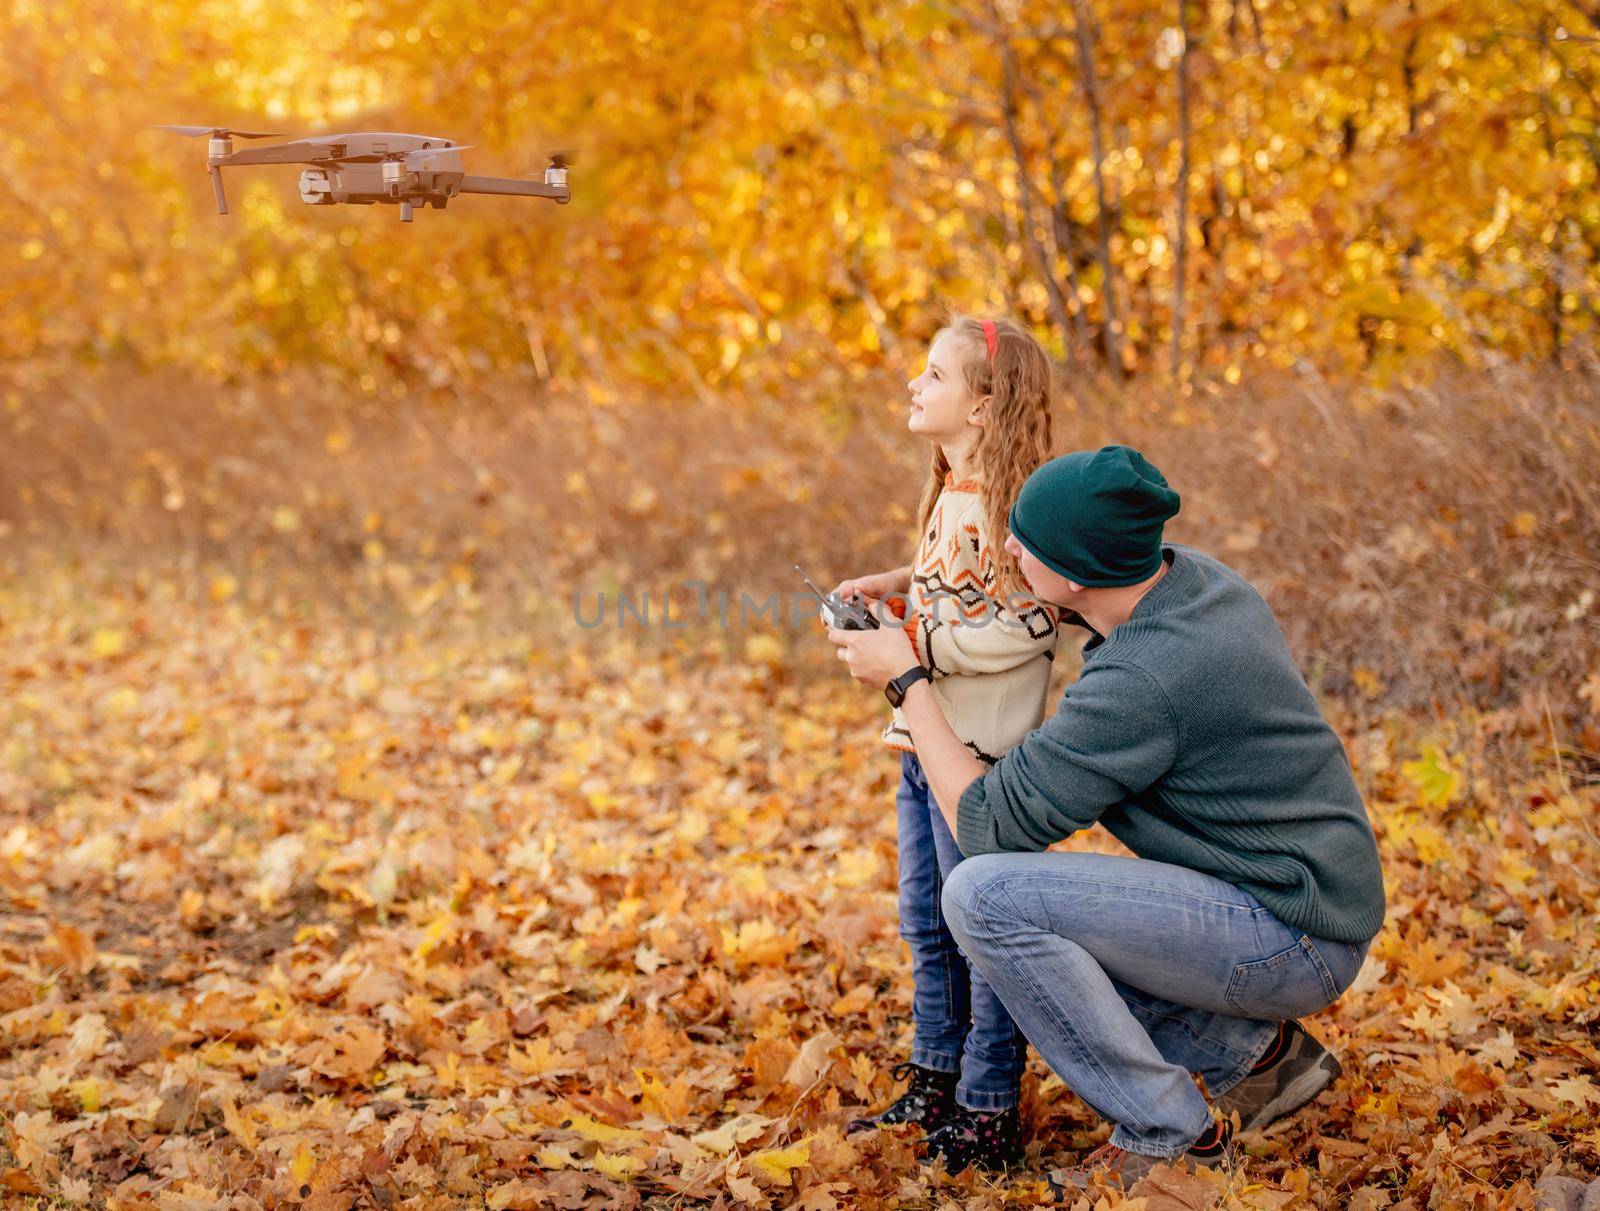 Father and daughter launch quadrocopter by tan4ikk1